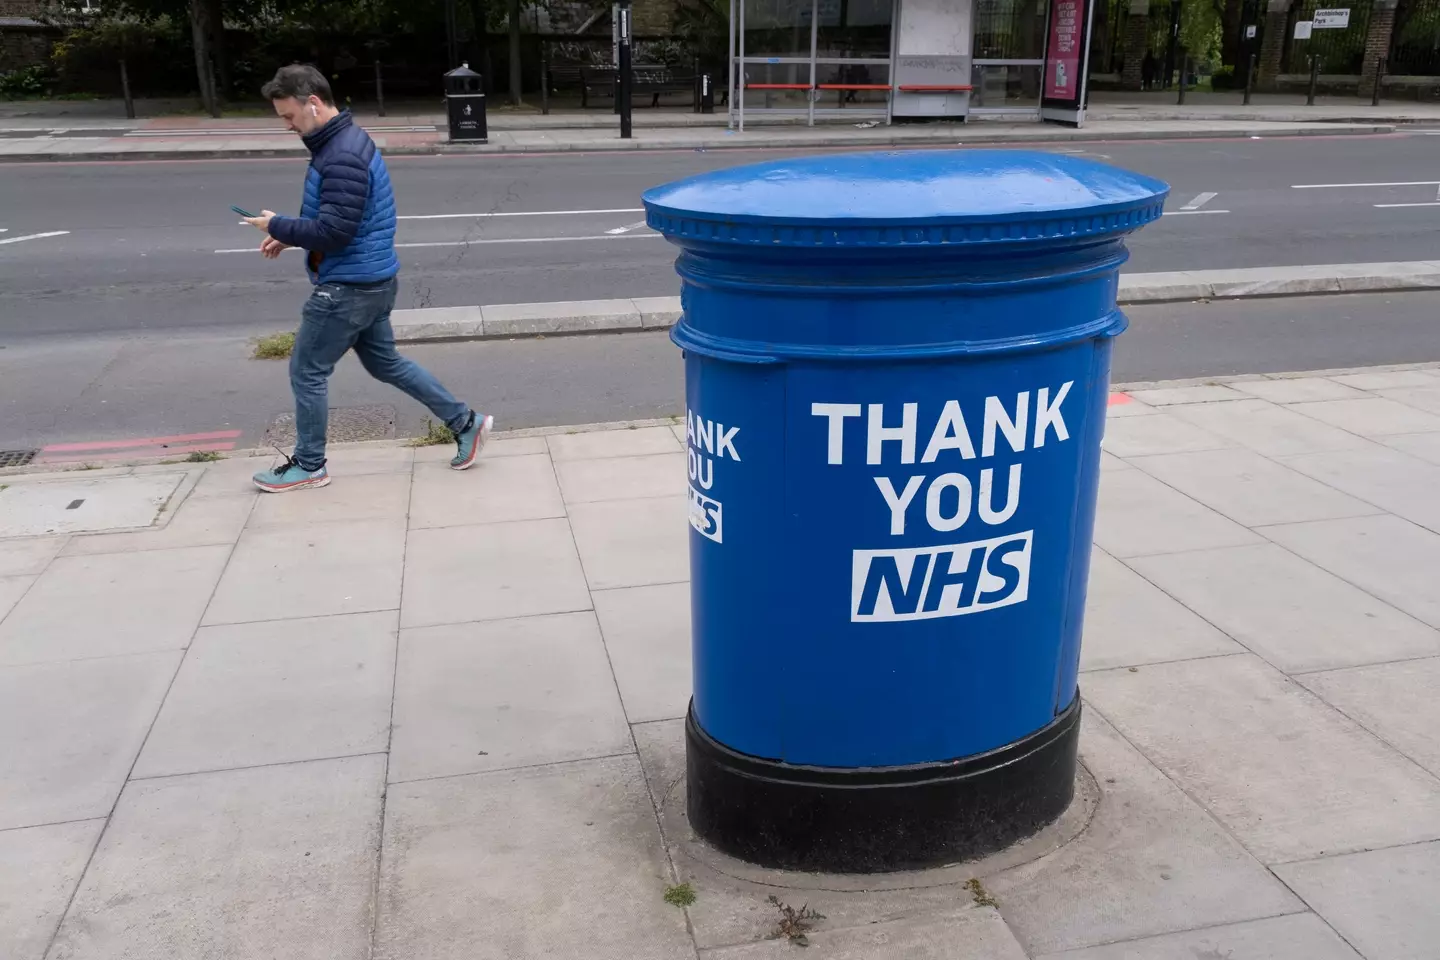 Perhaps the greatest achievement of the NHS is that it exists, and is still free.